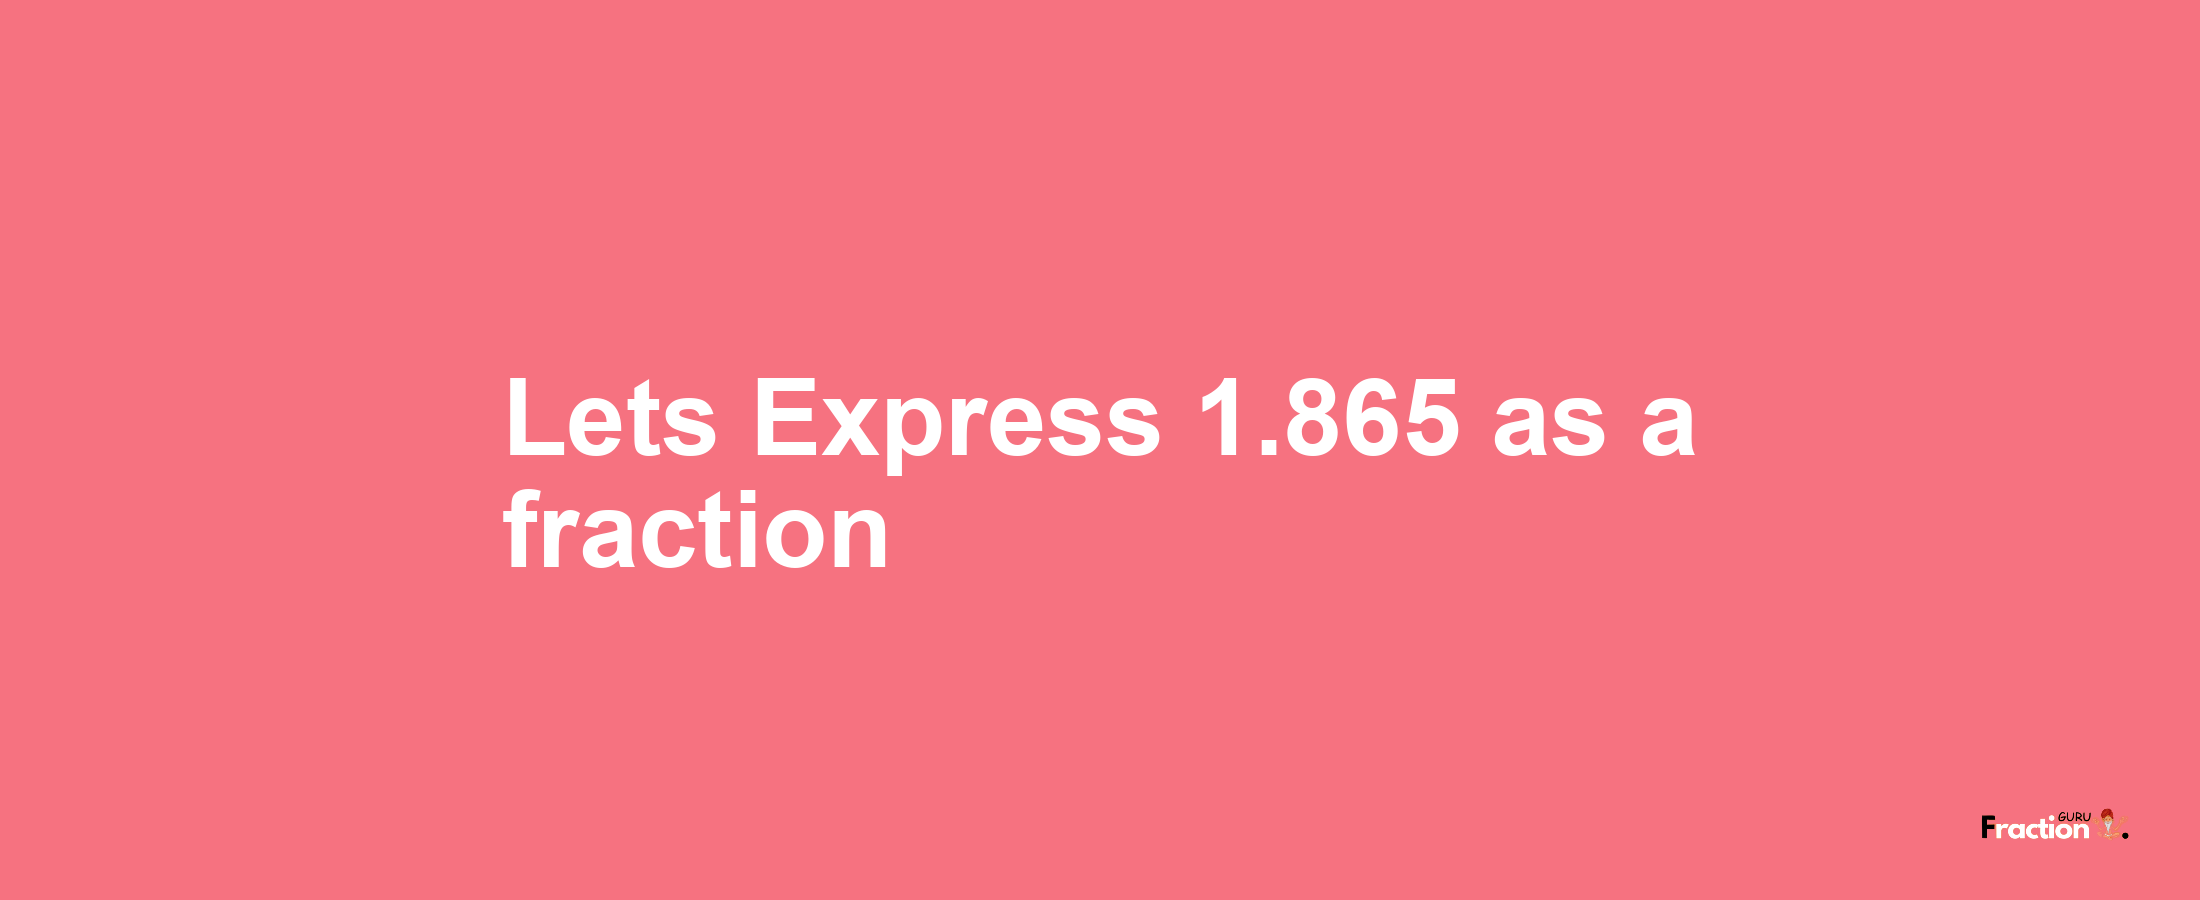 Lets Express 1.865 as afraction